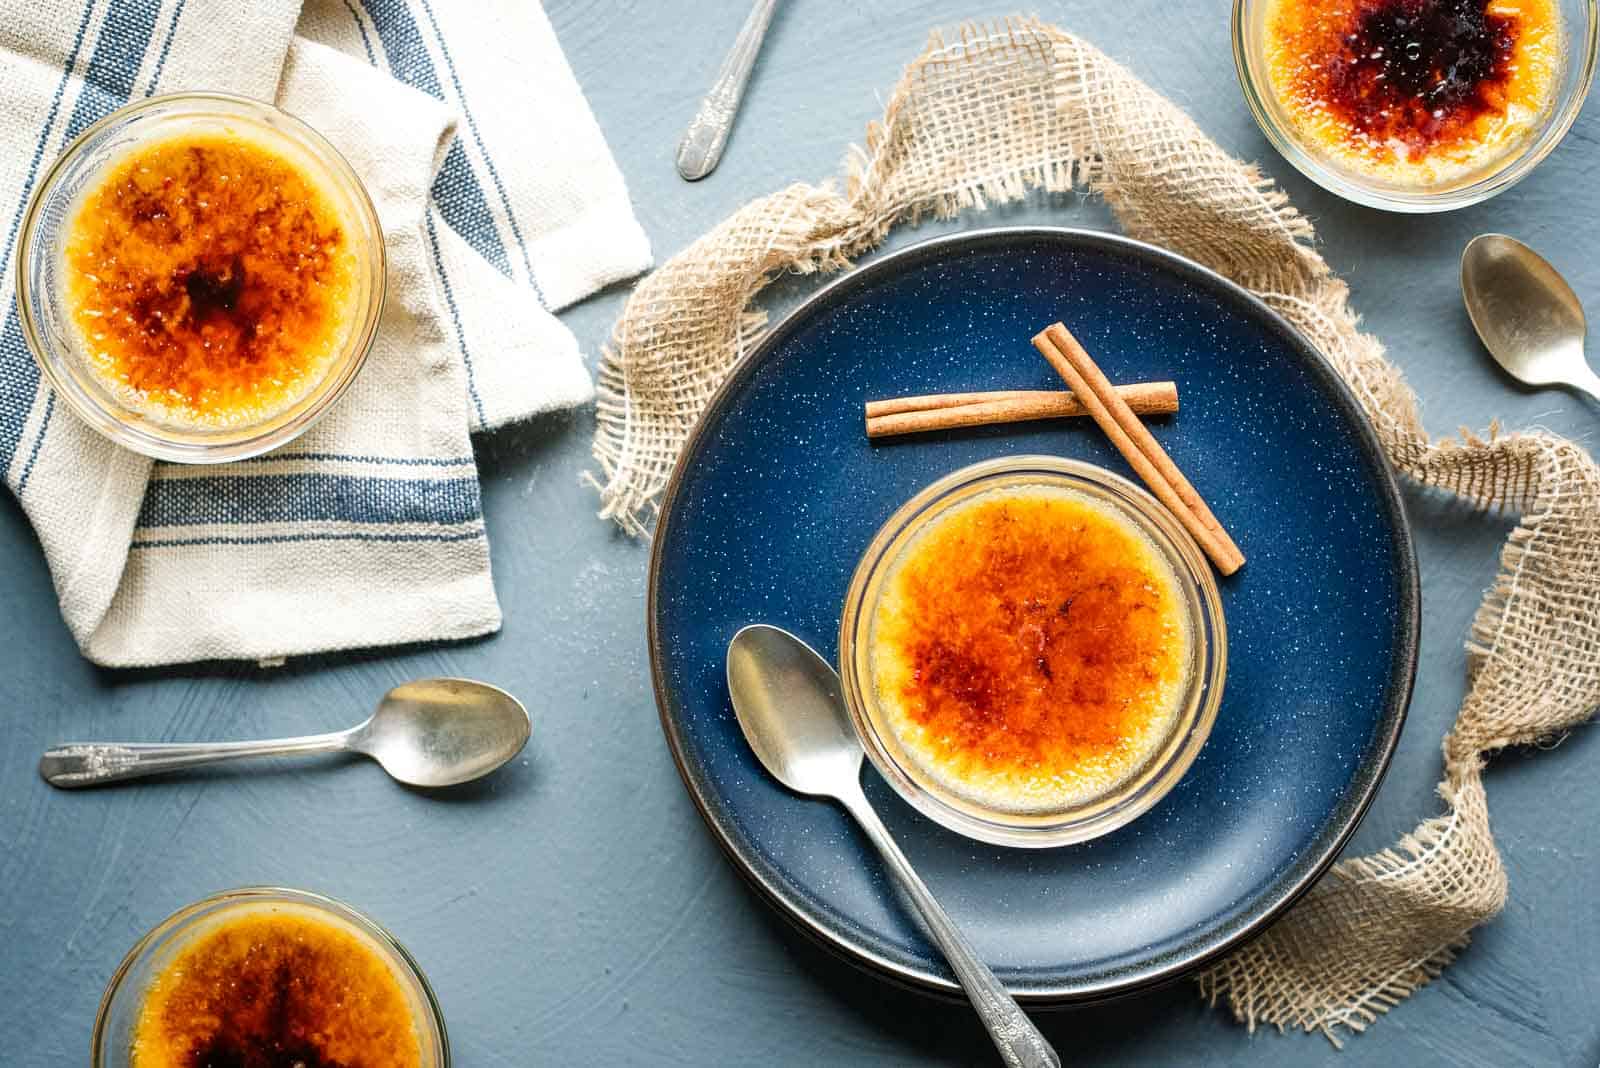 Pumpkin spice creme brulee on a blue plate with a spoon and cinnamon sticks.